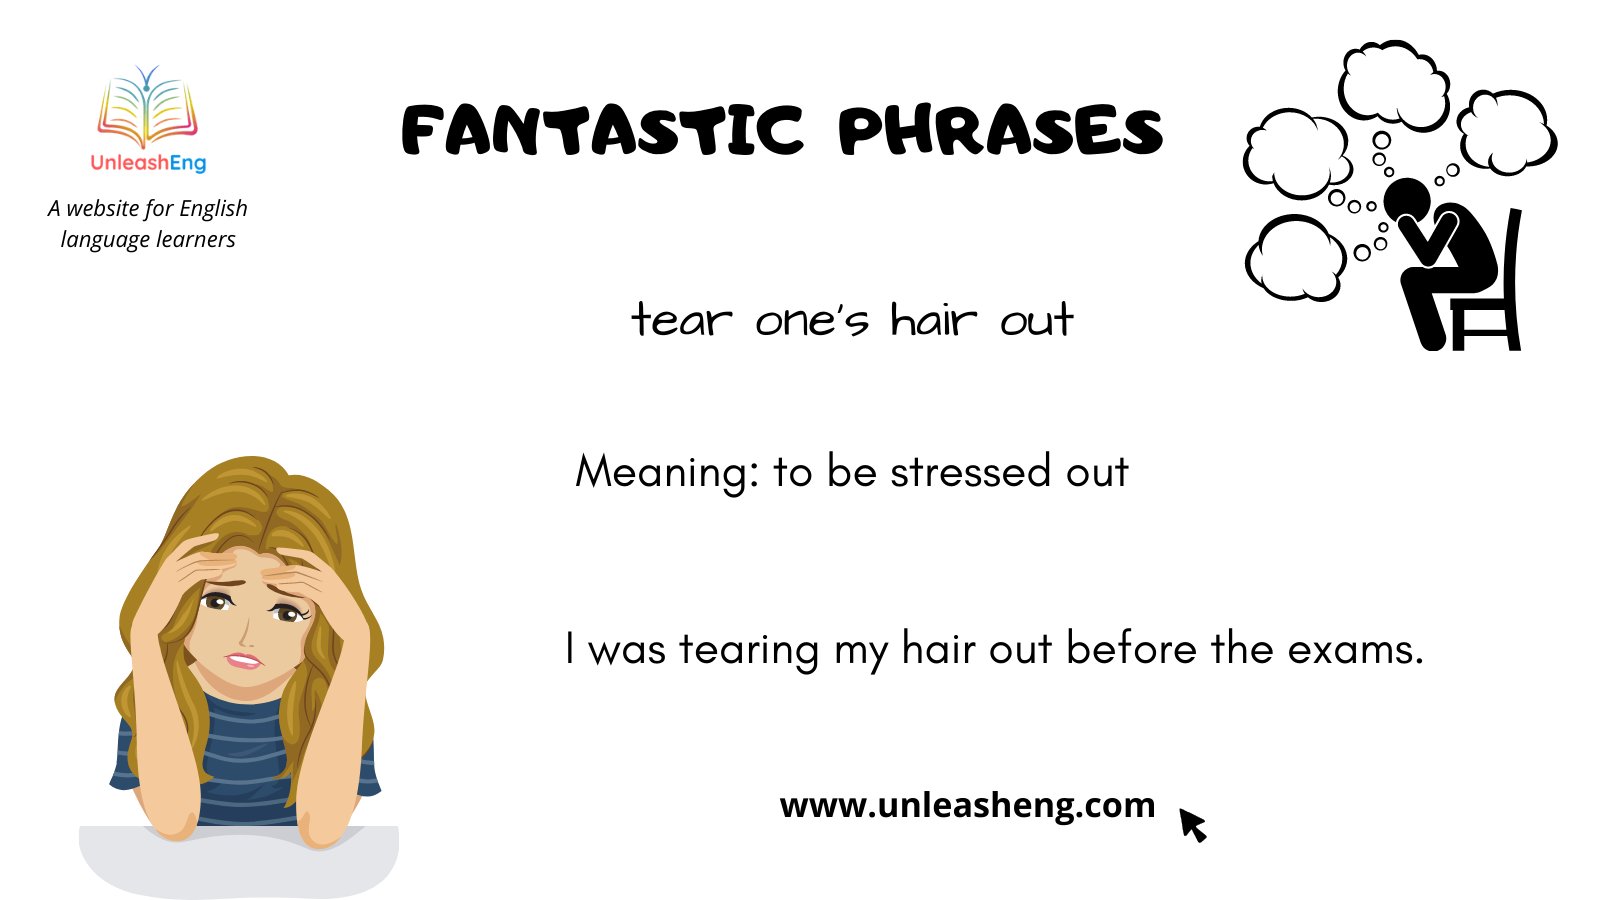 Unleasheng The Beauty Of English Idioms And Phrases Is That They Usually Don T Mean What They Literally Say Here S Another One From Our Stock Learnenglish Phrasesandidioms Languageskills Languagelearning Education T Co